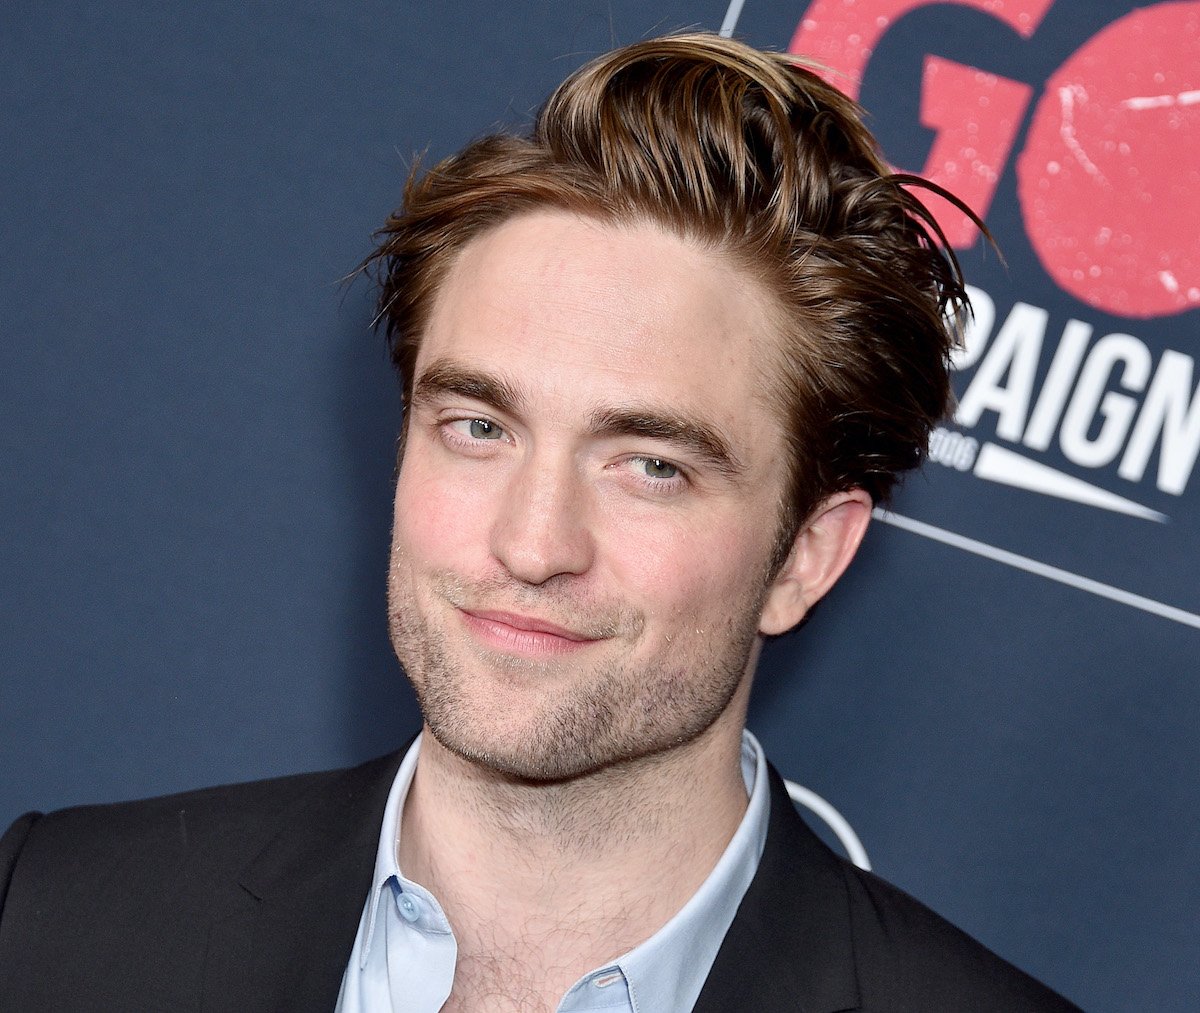 movie star Robert Pattinson at the Go Campaign's 13th Annual Go Gala at NeueHouse Hollywood